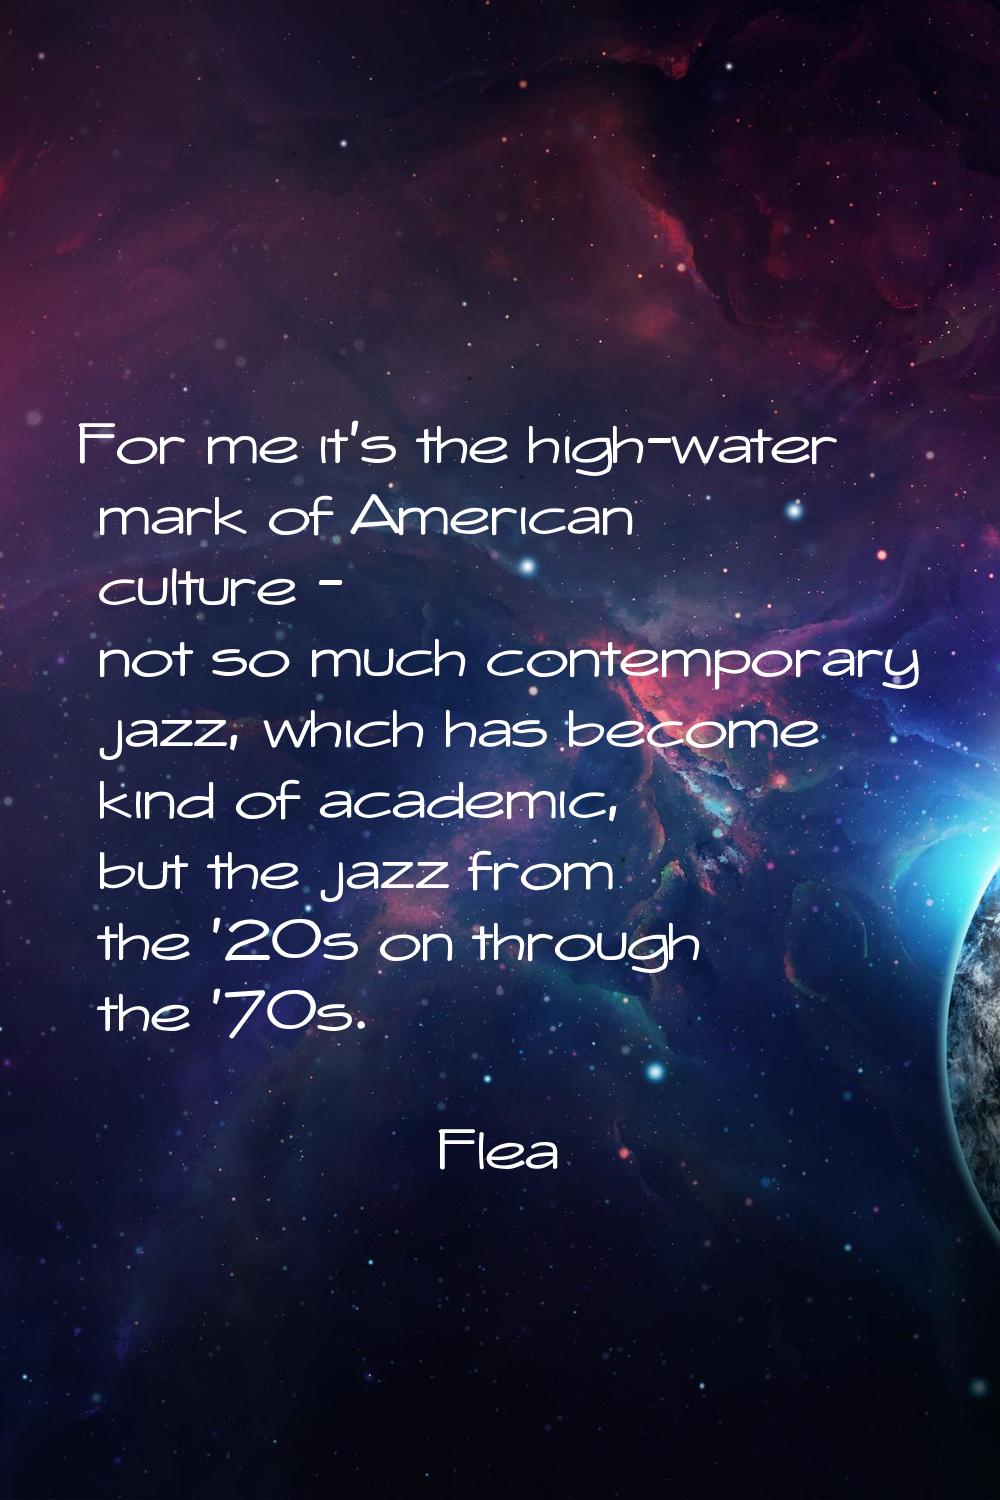 For me it's the high-water mark of American culture - not so much contemporary jazz, which has beco